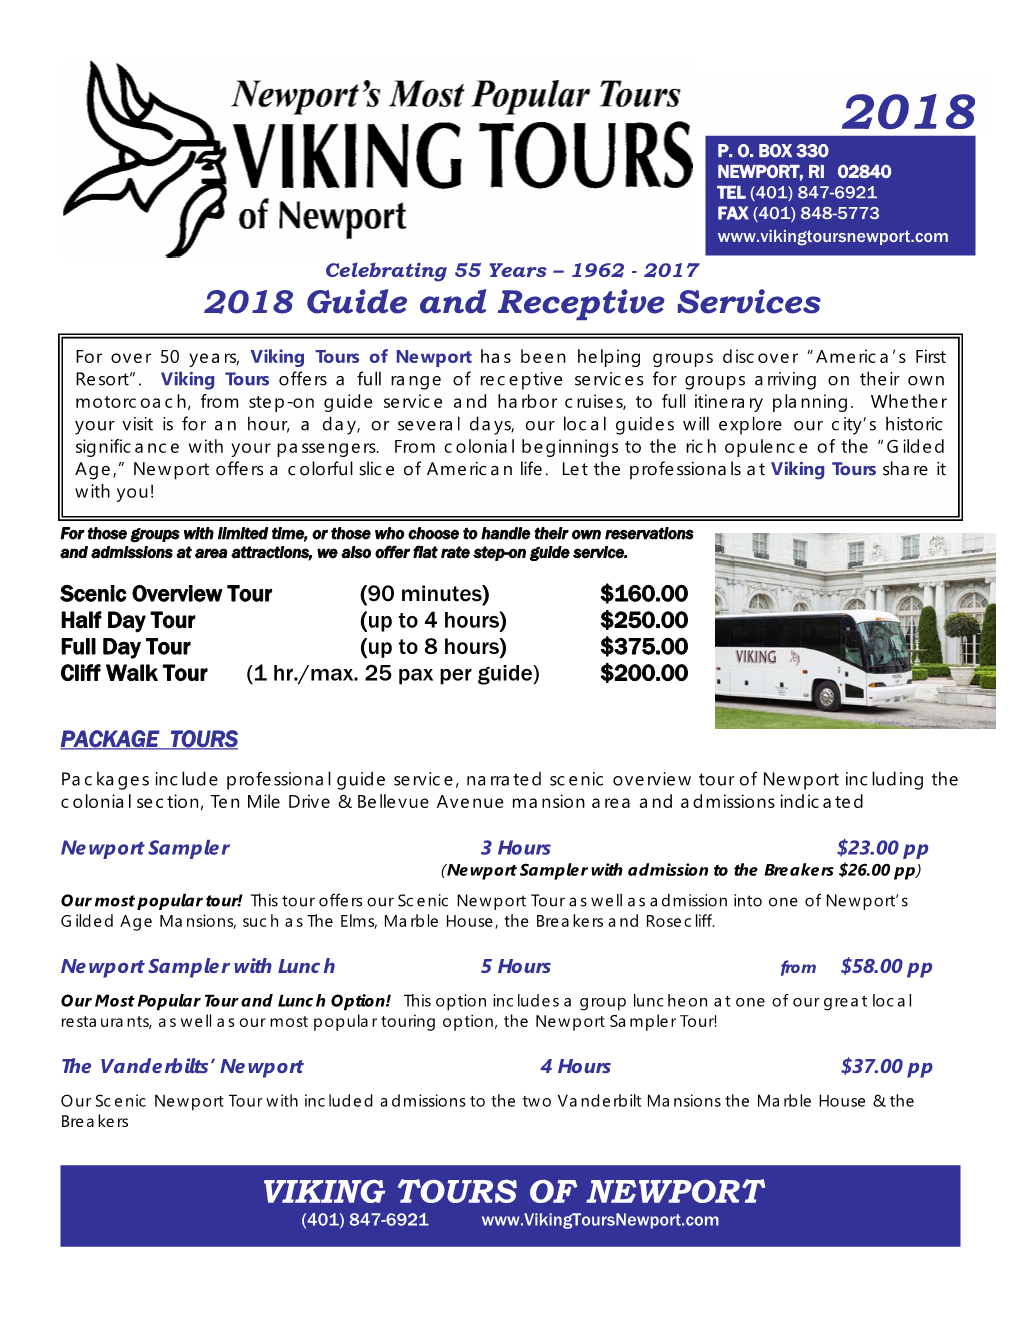 2018 Guide and Receptive Services VIKING TOURS of NEWPORT